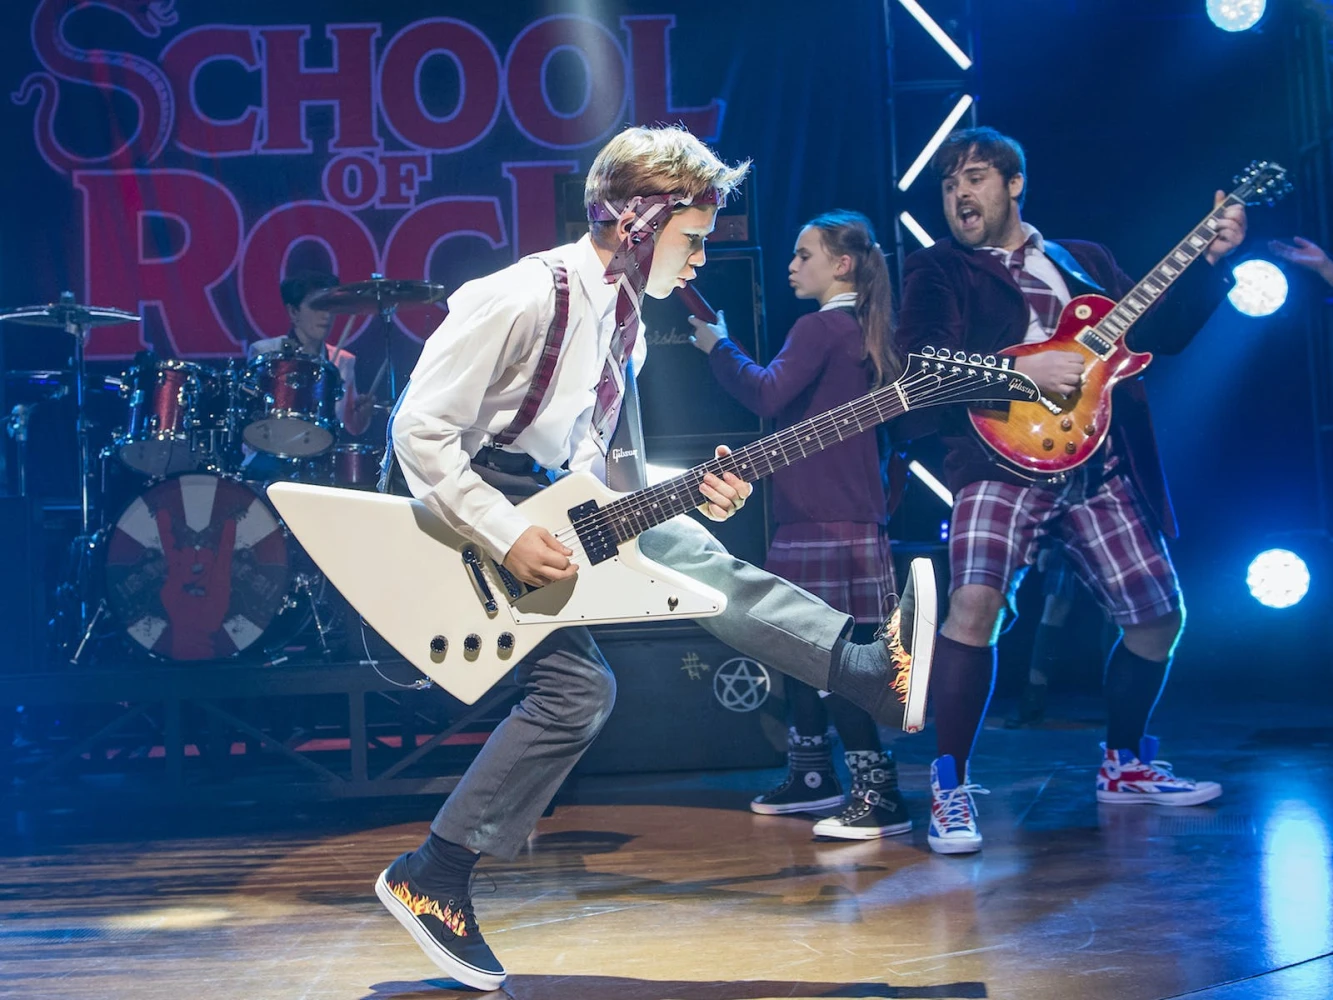 School of Rock: What to expect - 6